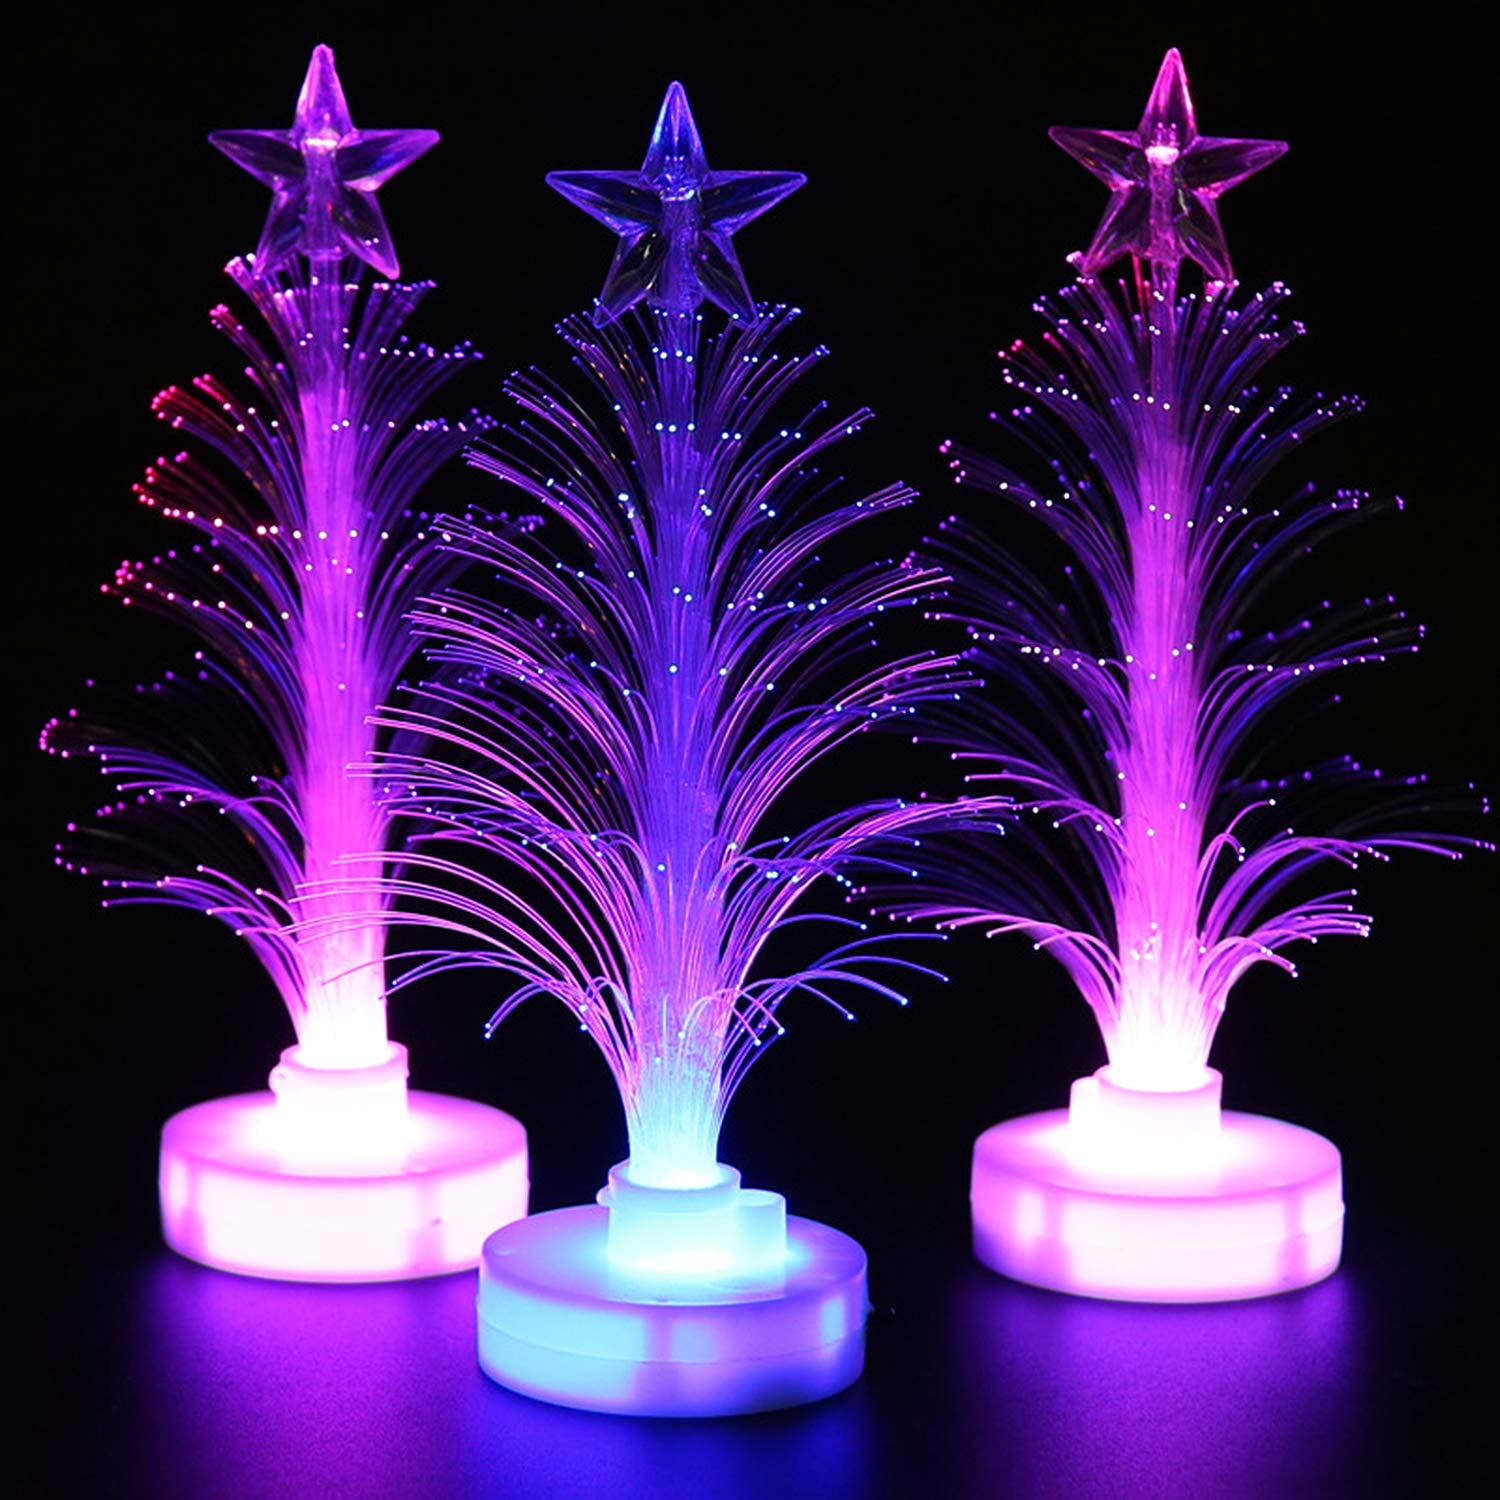 SUPERIORVZND 3D Christmas Tree Night Light Remote Control Power Touch  Switch Table Desk Optical Illusion Lamps 16 Color Changing Lights Home  Decoration Xmas Birthday Gift 